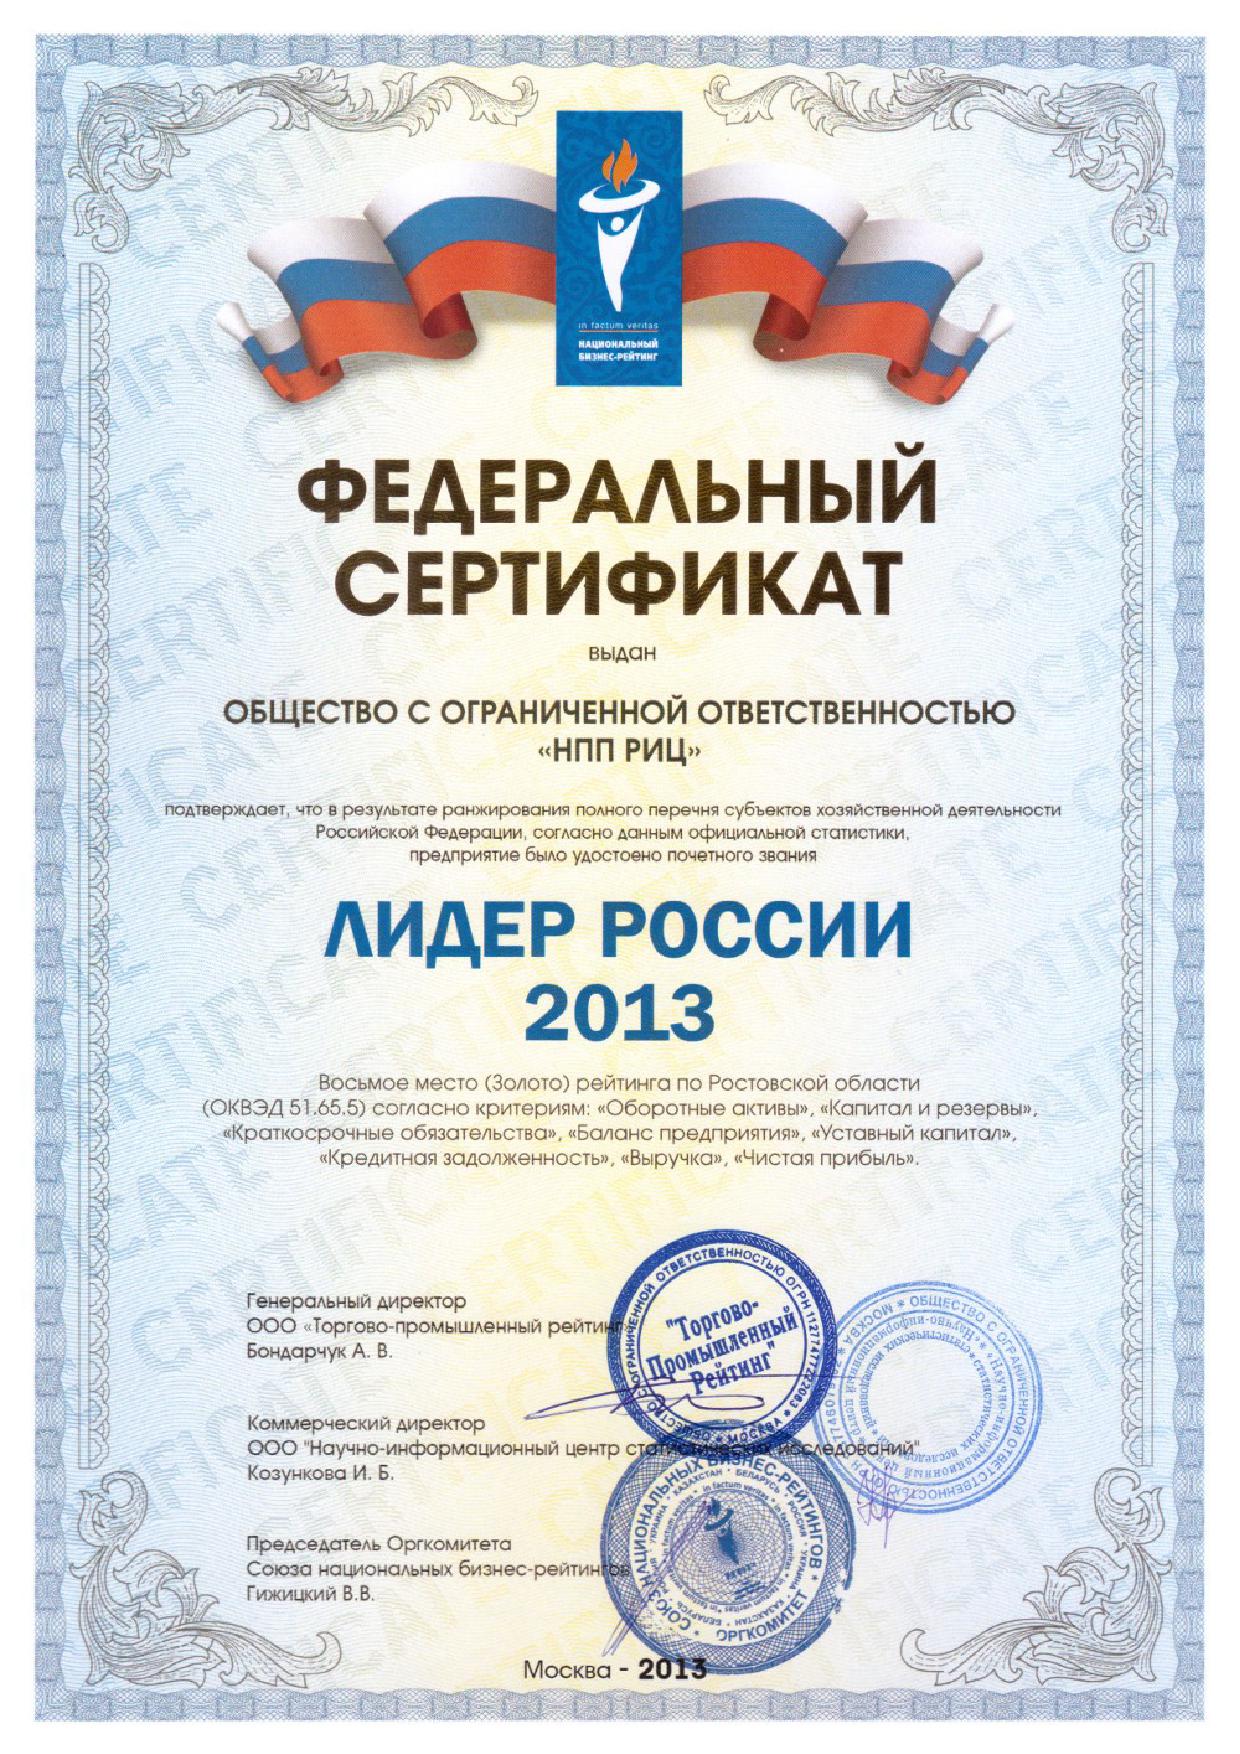 2013-leader-of-the-Russian-federal-certificate